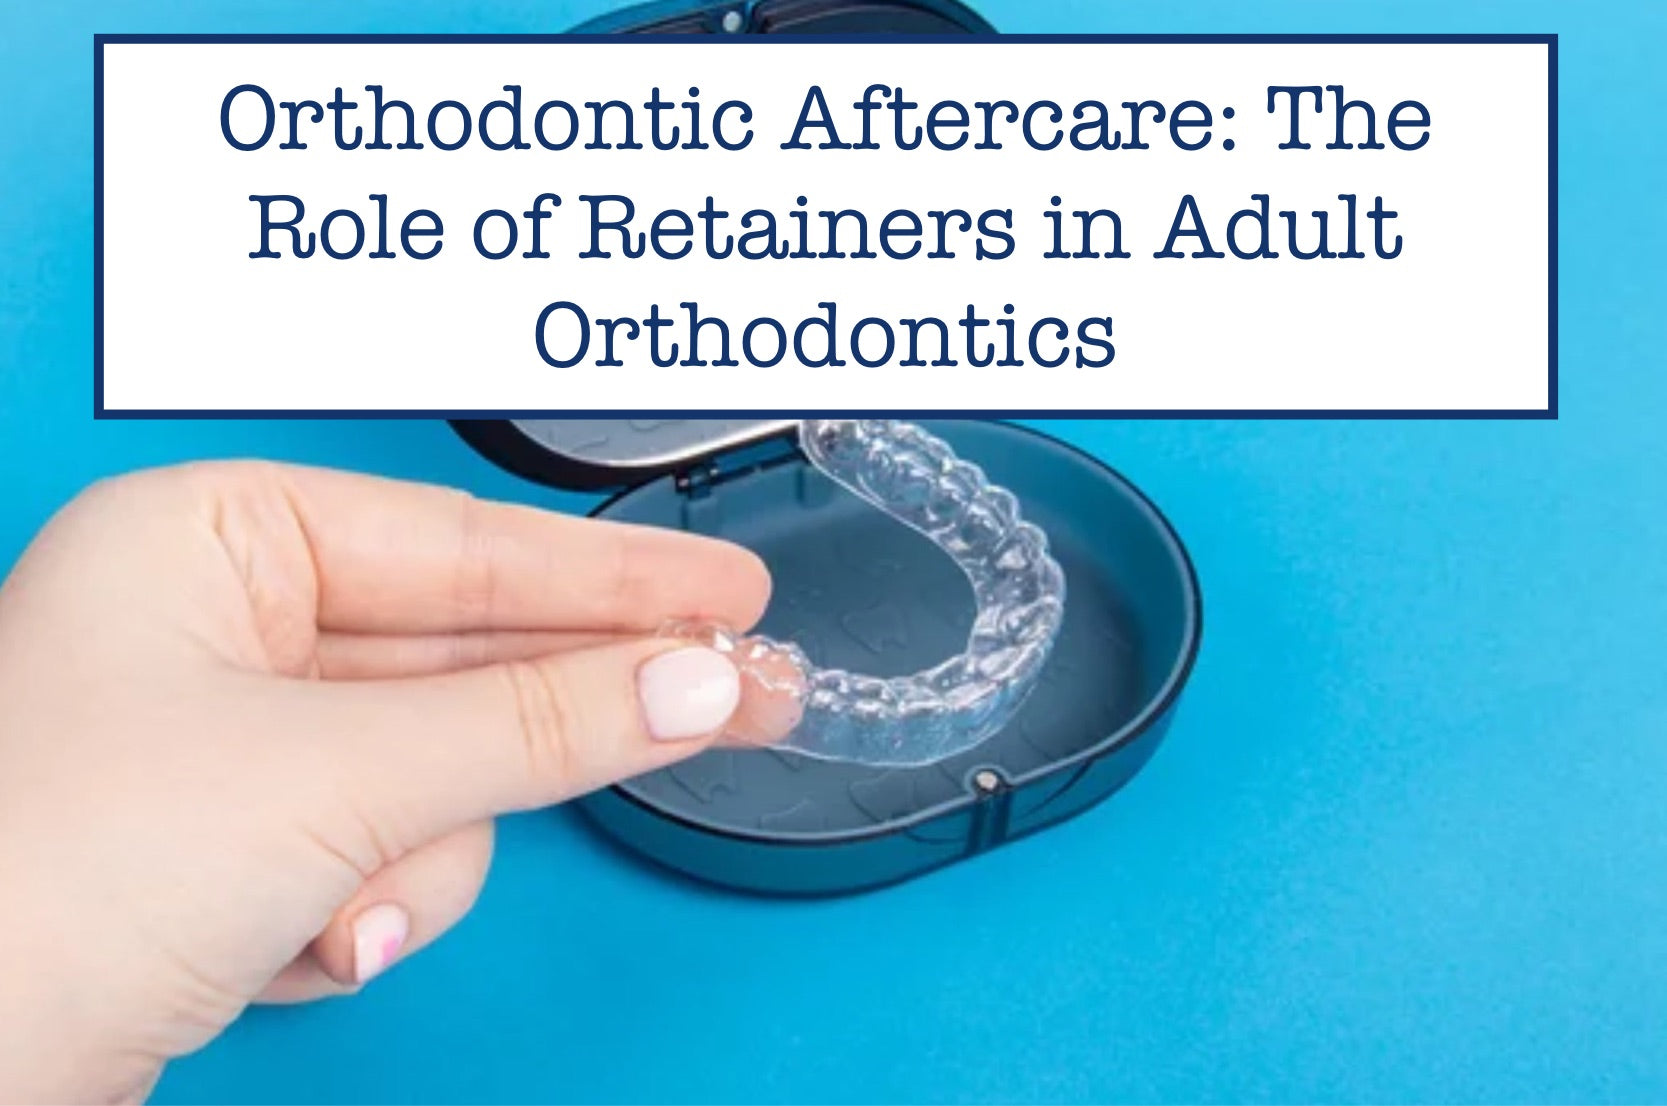 Orthodontic Aftercare: The Role of Retainers in Adult Orthodontics